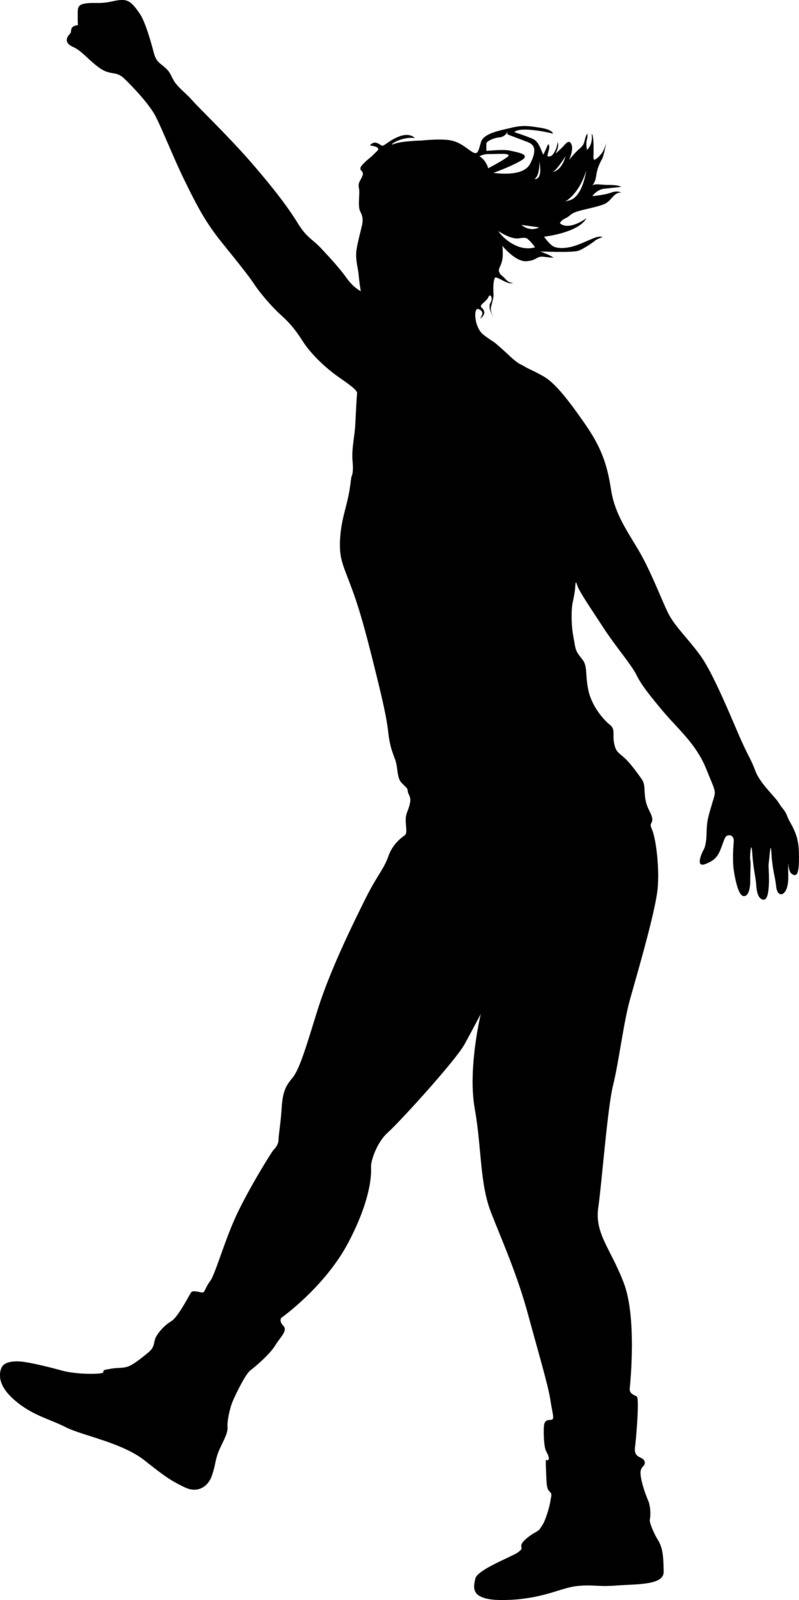 Black silhouettes of beautiful woman with arm raised. Vector illustration by aarrows